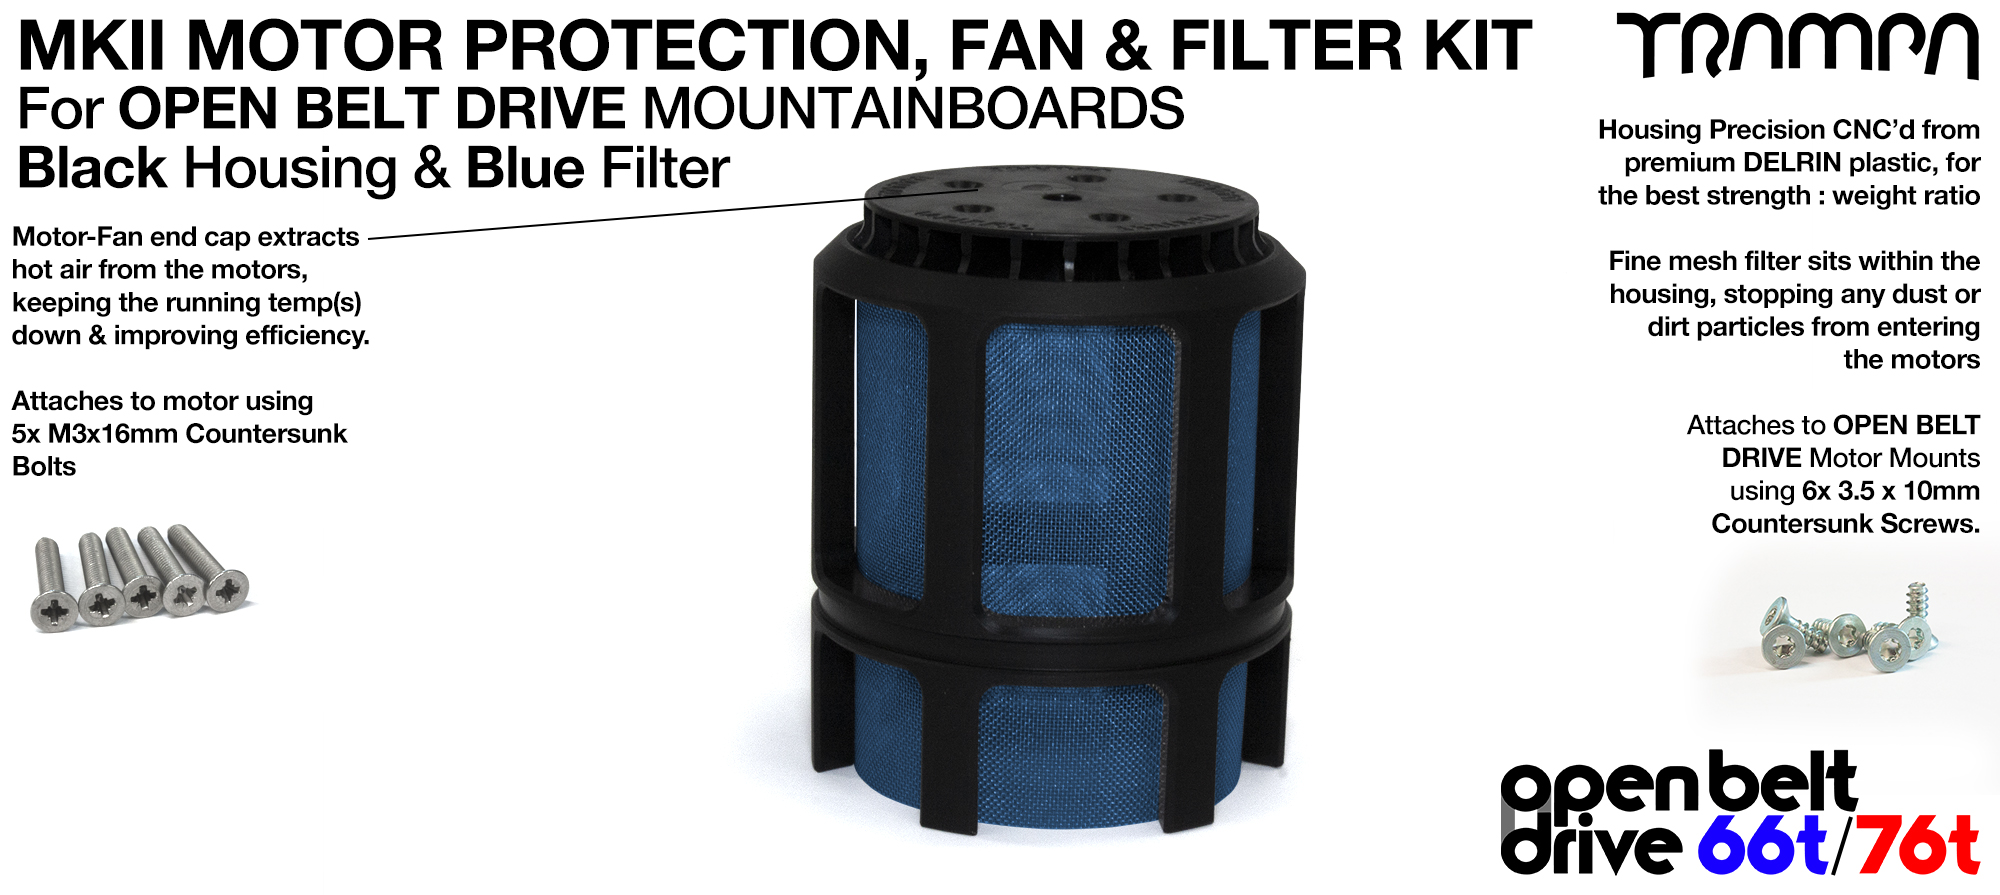 FULL CAGE Motor protection SUPER STRONG DELRIN Plastic includes Fan & BLUE Filter - SINGLE